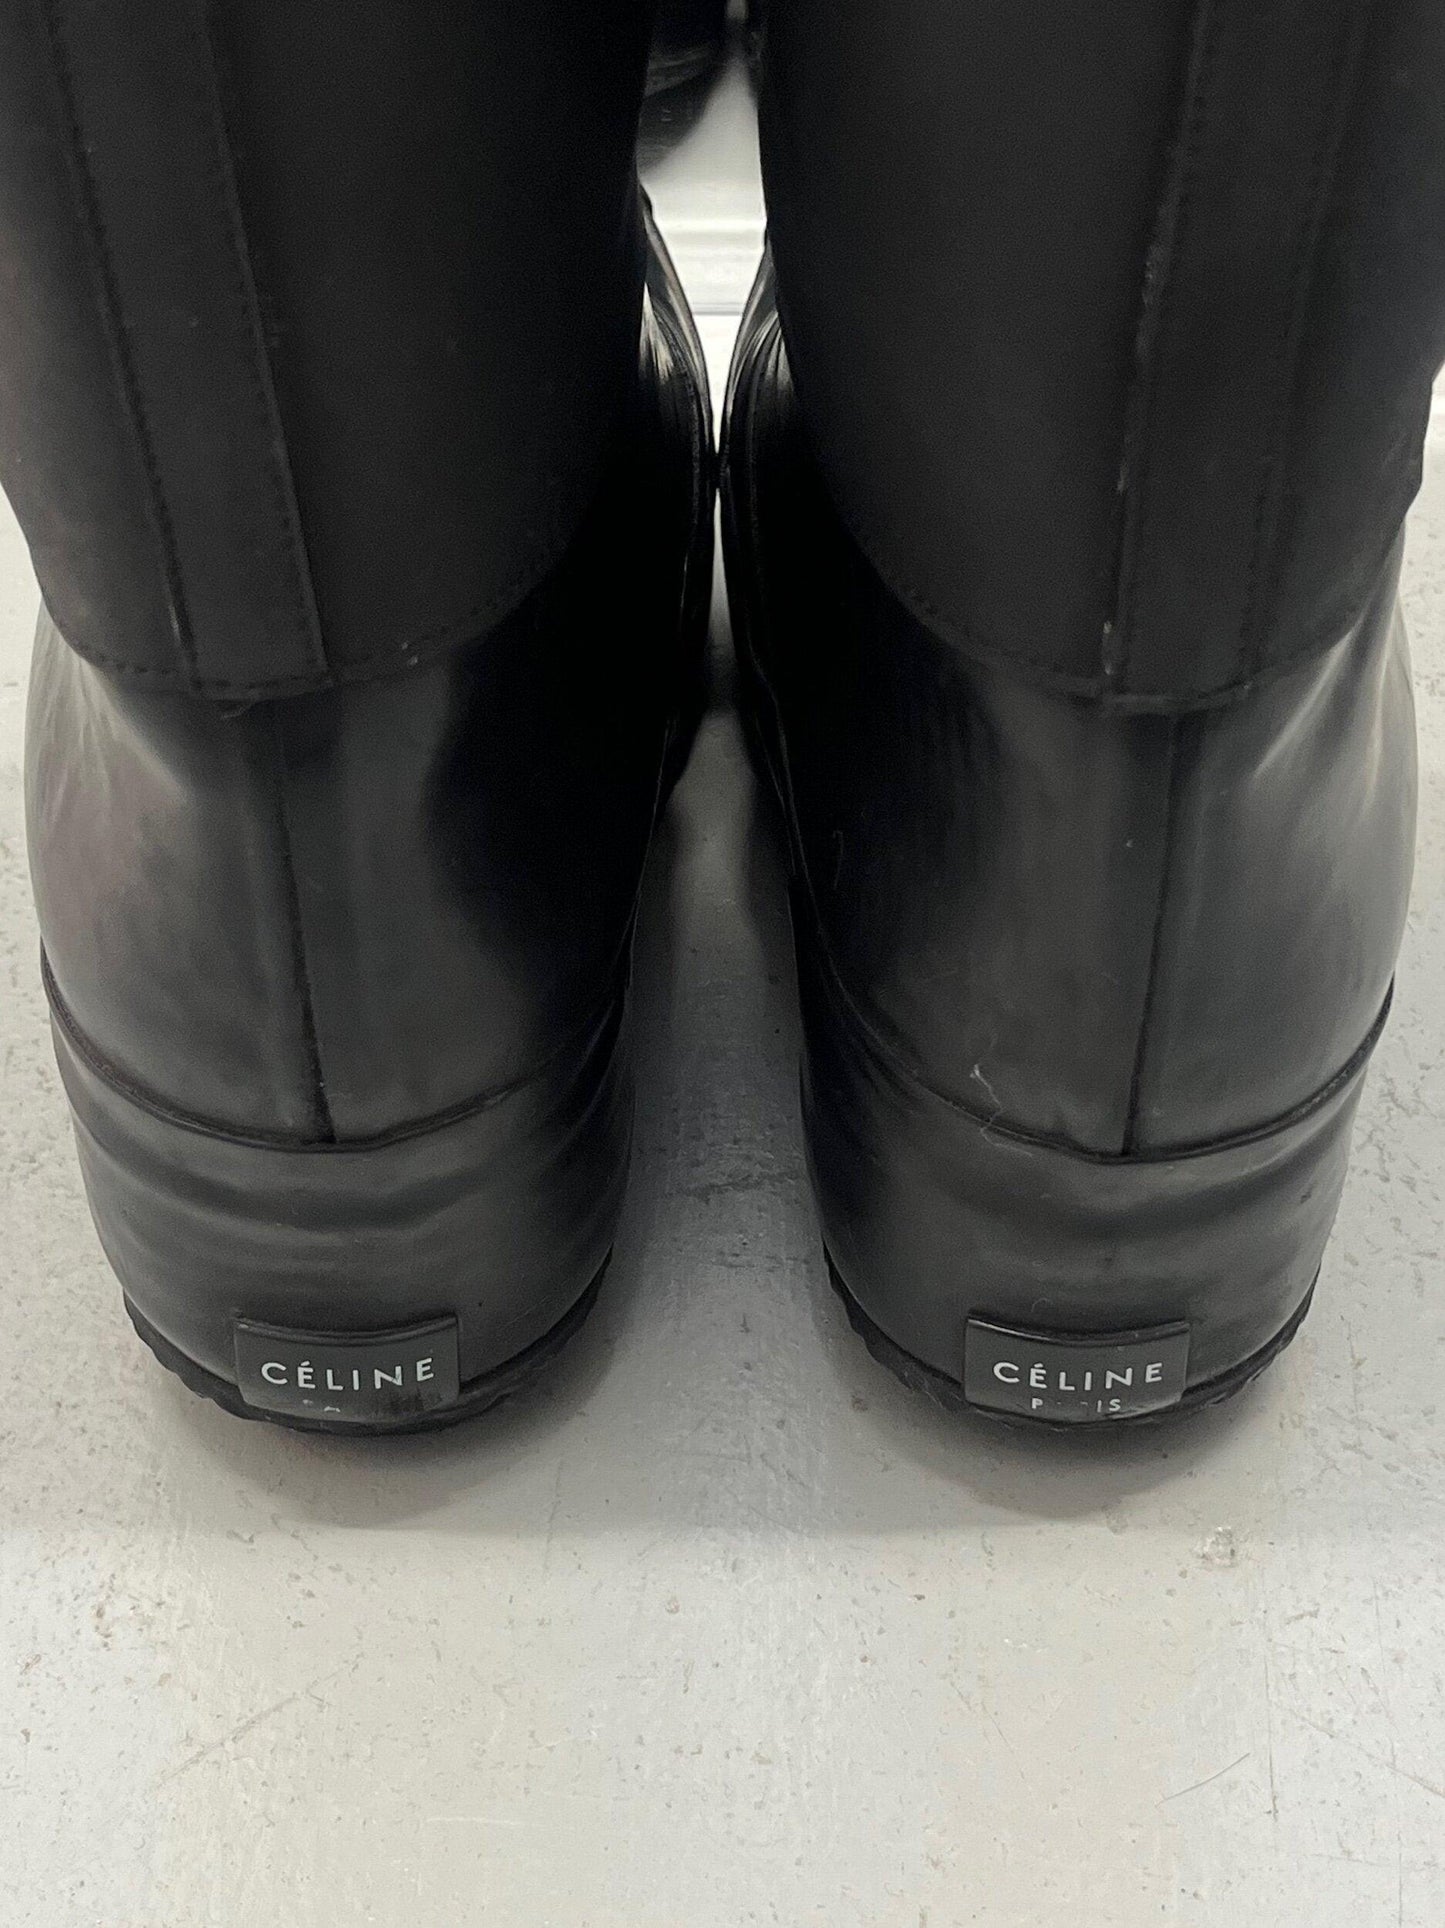 Celine Moon Boots - Known Source